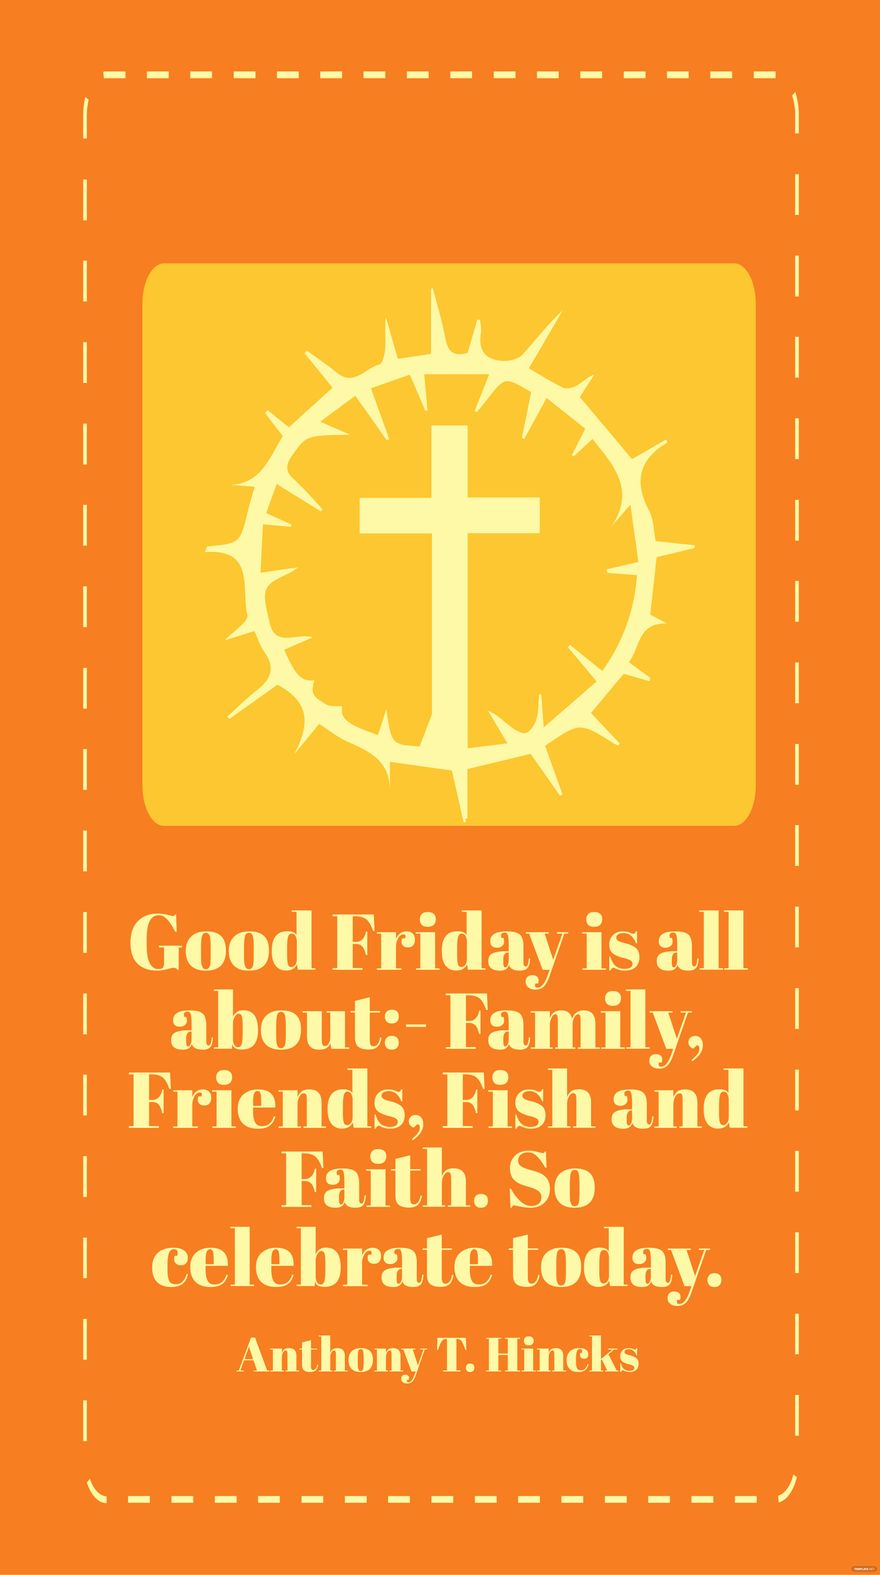 Anthony T. Hincks - Good Friday is all about:- Family, Friends, Fish and Faith. So celebrate today.